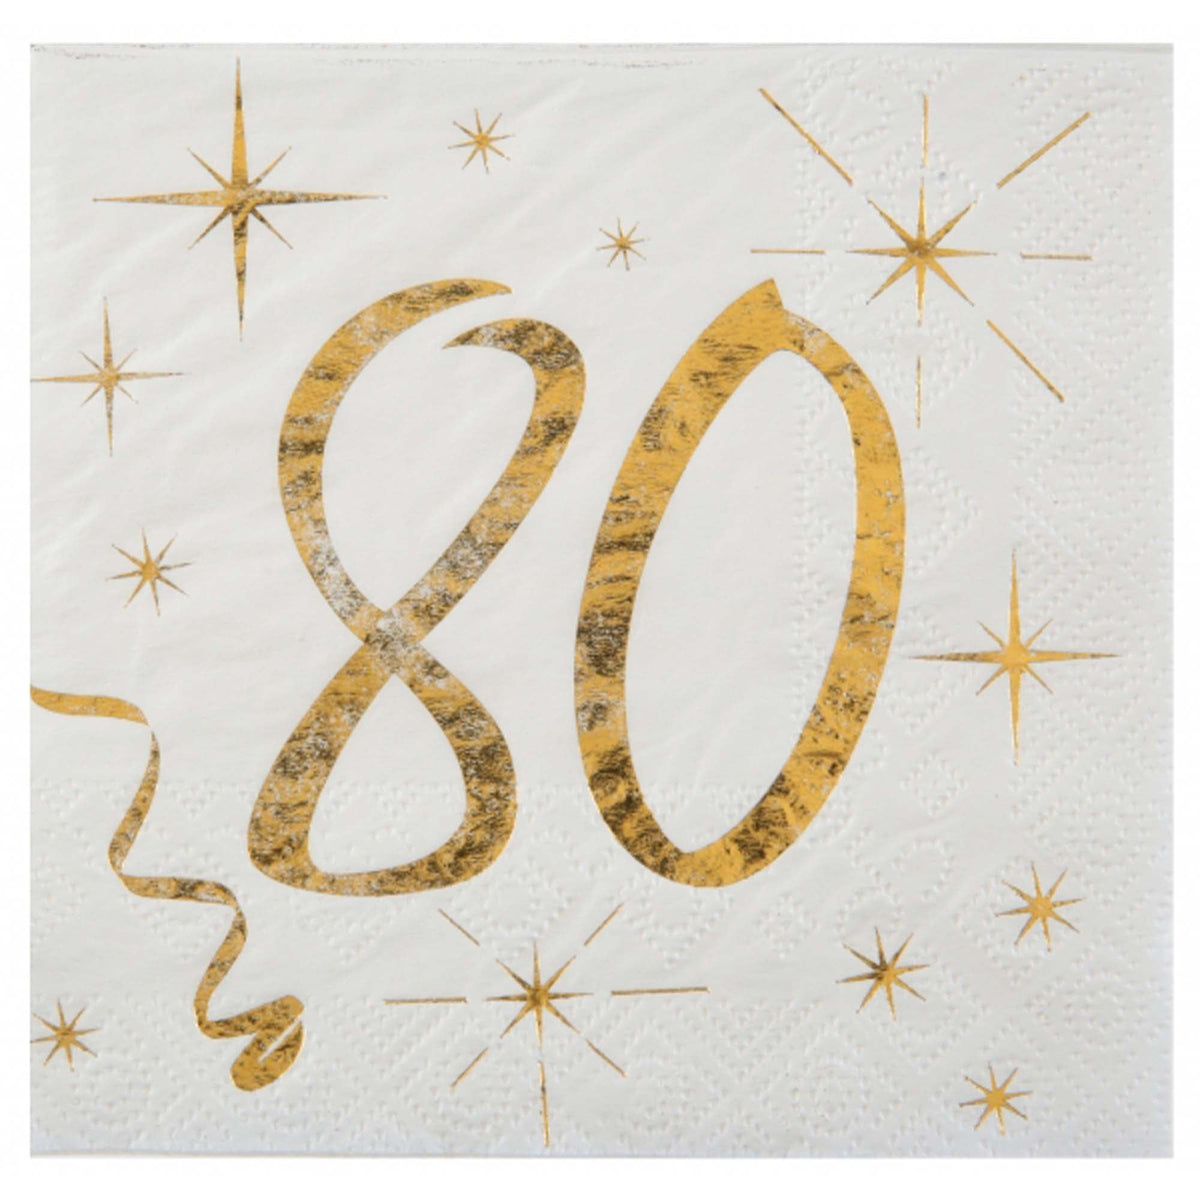 SANTEX General Birthday Starry Golden Age 80th Birthday Large Lunch Napkins, 20 Count 3660380040682